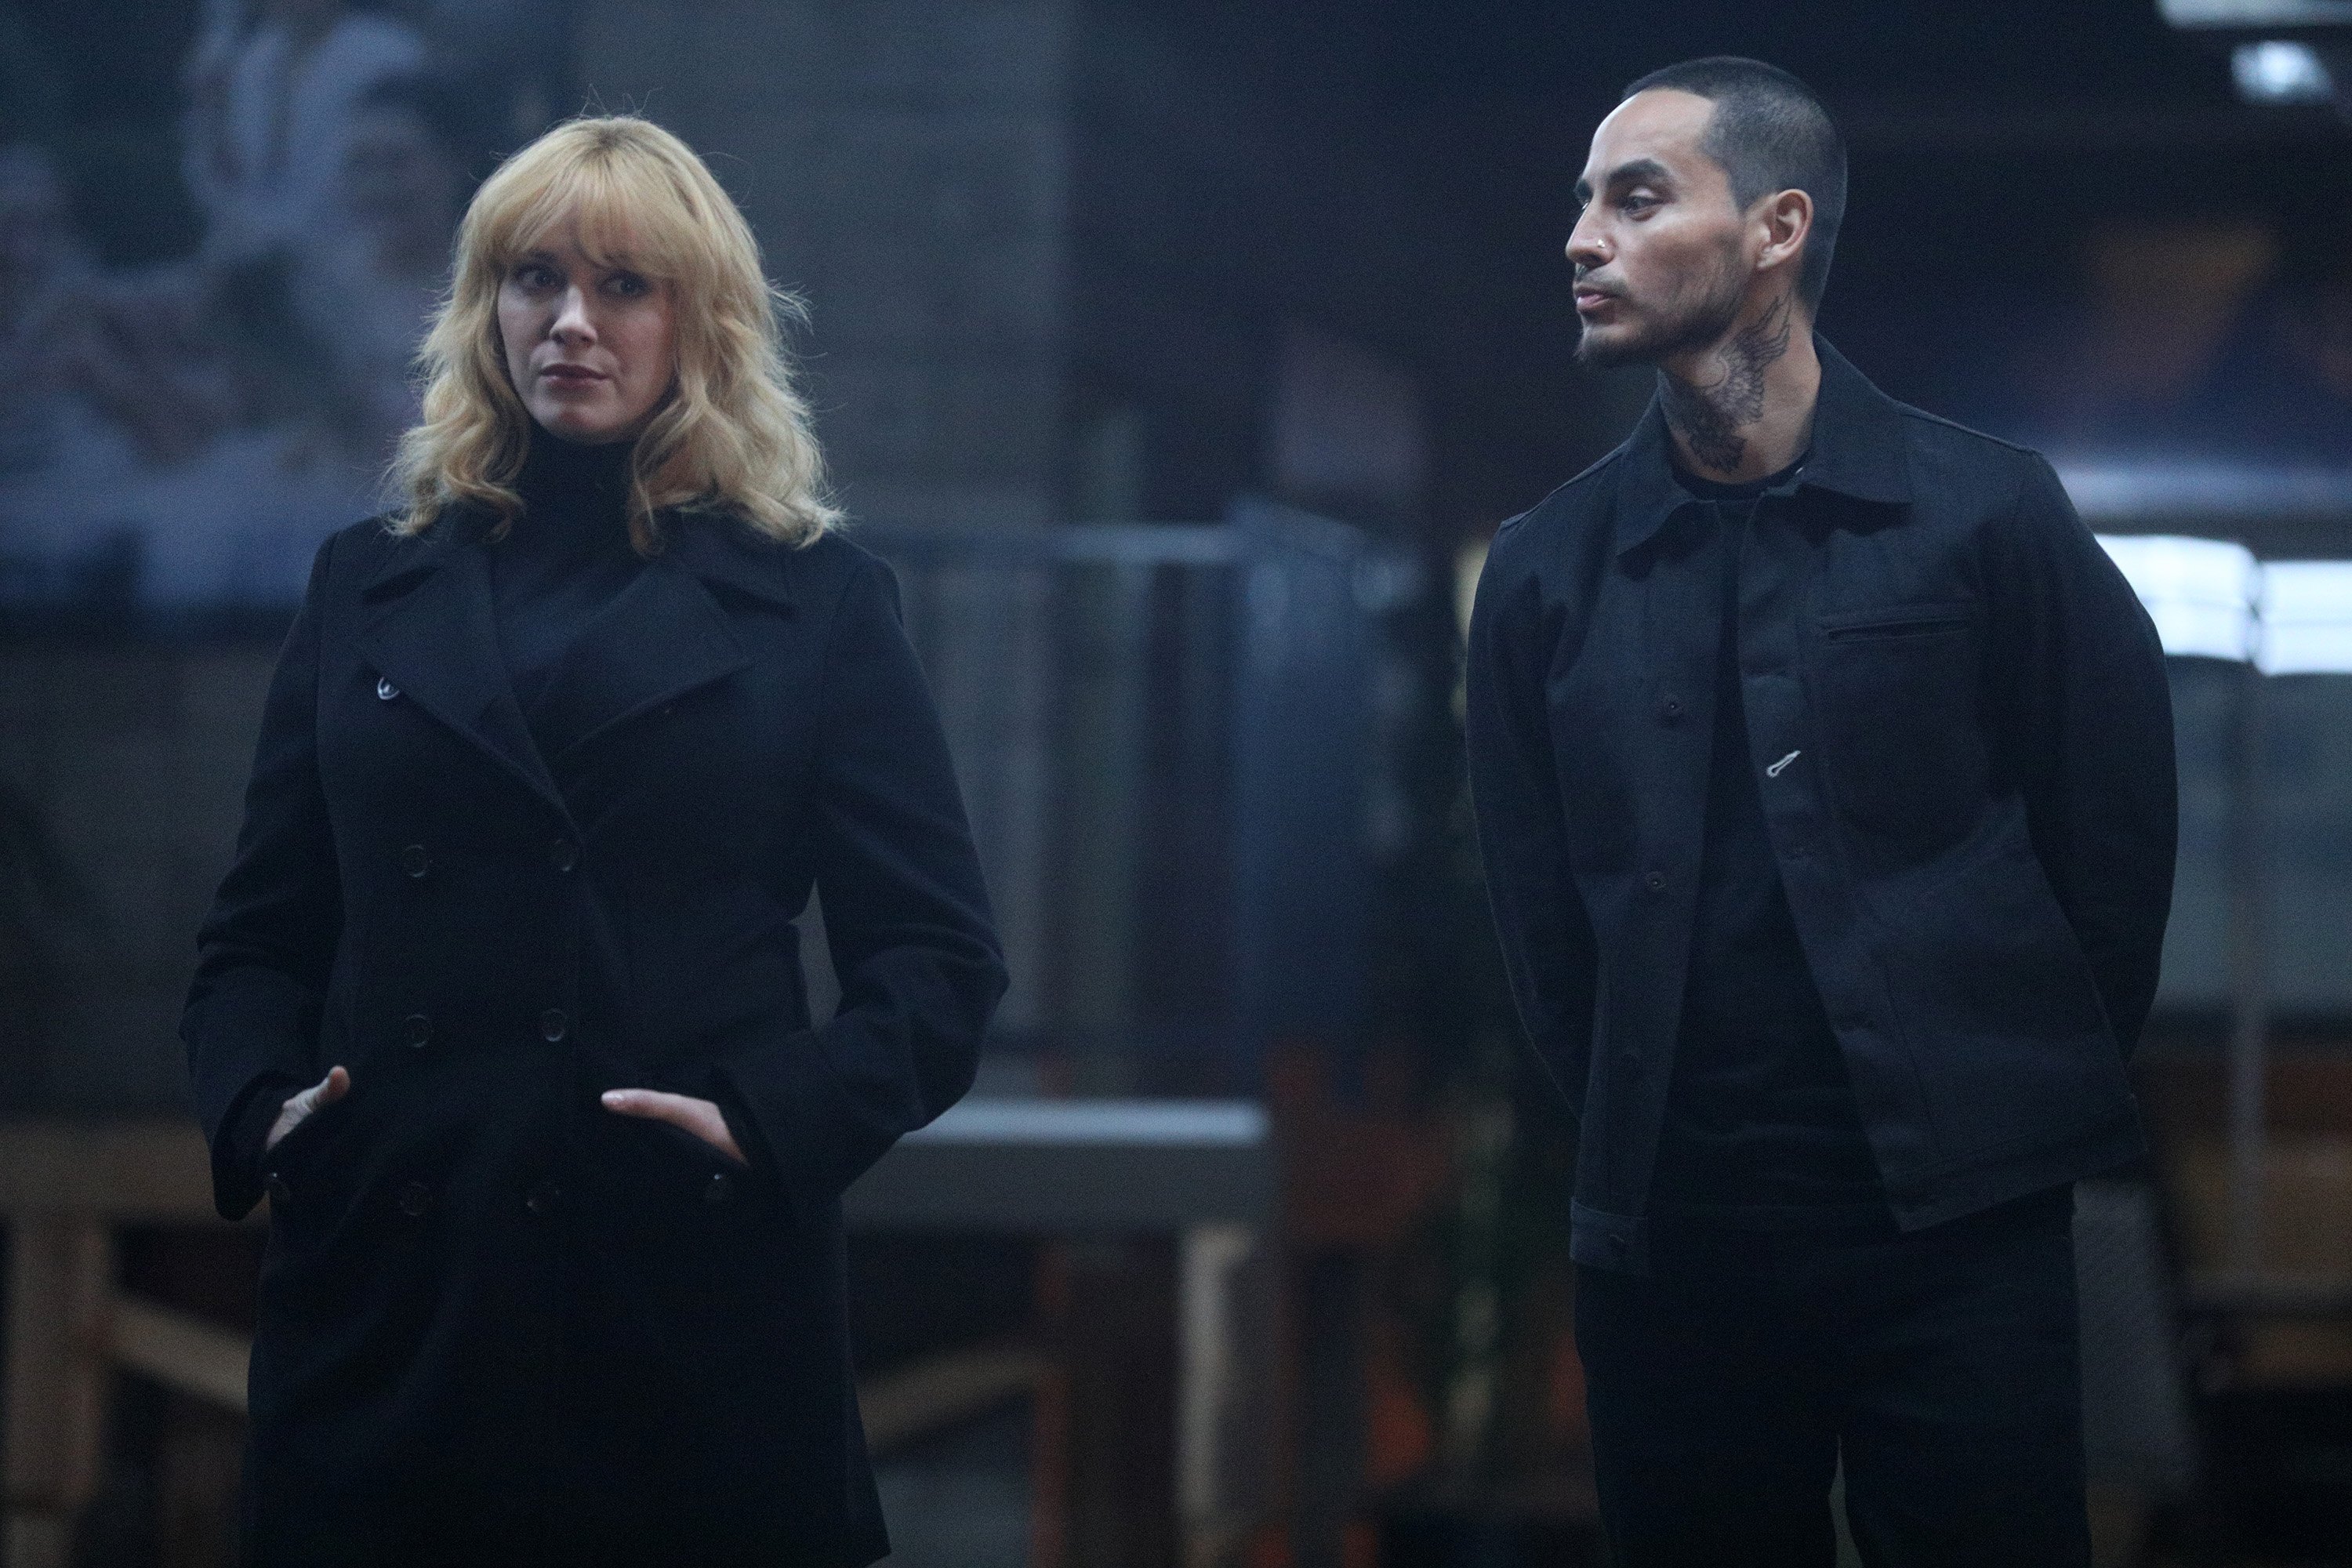 Good Girls stars Christina Hendricks and Manny Montana as Beth and Rio wearing all-black during a scene.